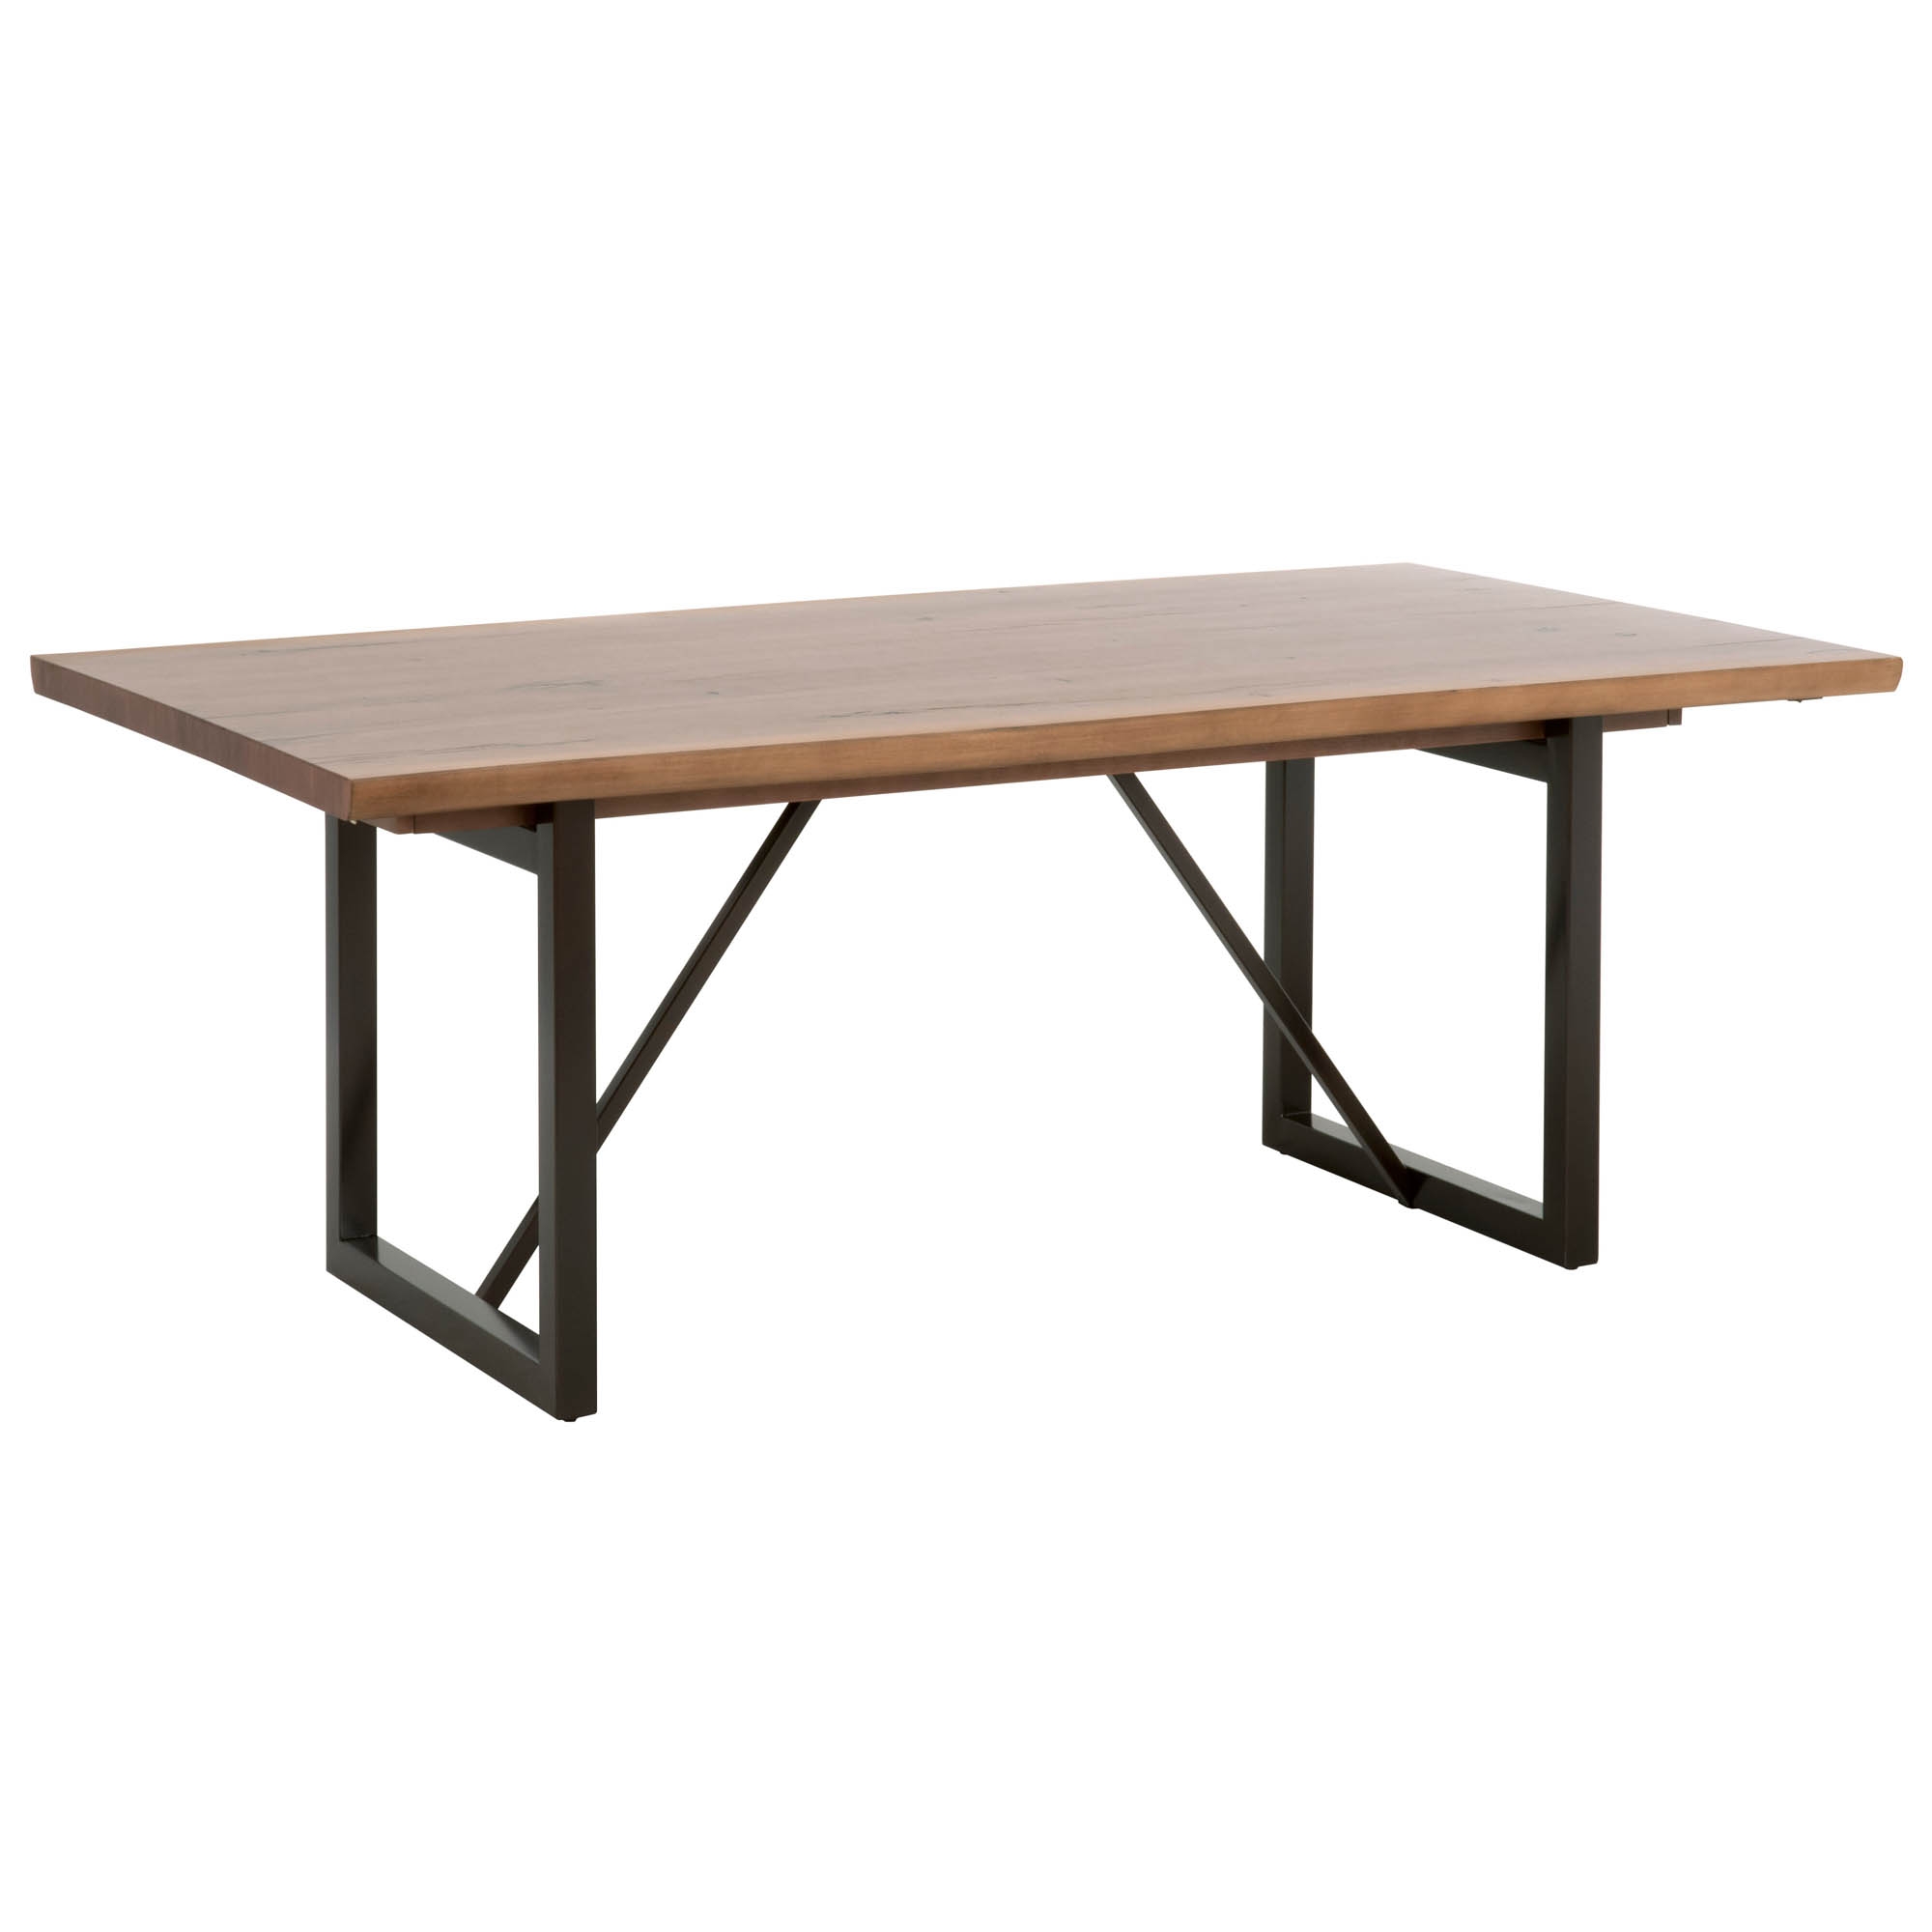 Origin Extension Dining Table - Image 1